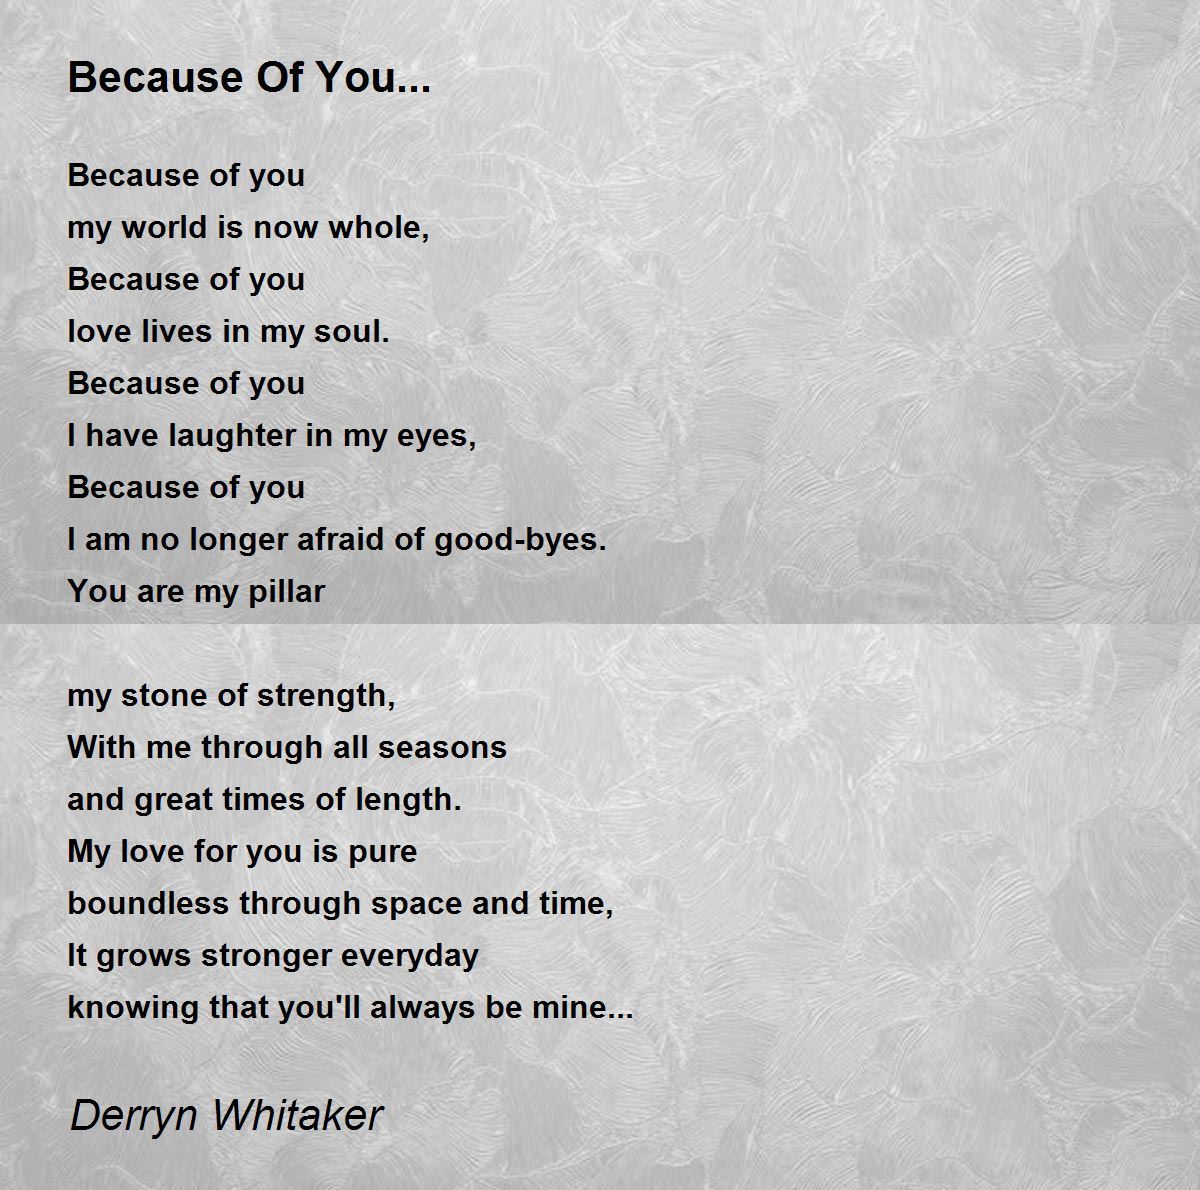 Because Of You - Because Of You Poem by Derryn Whitaker